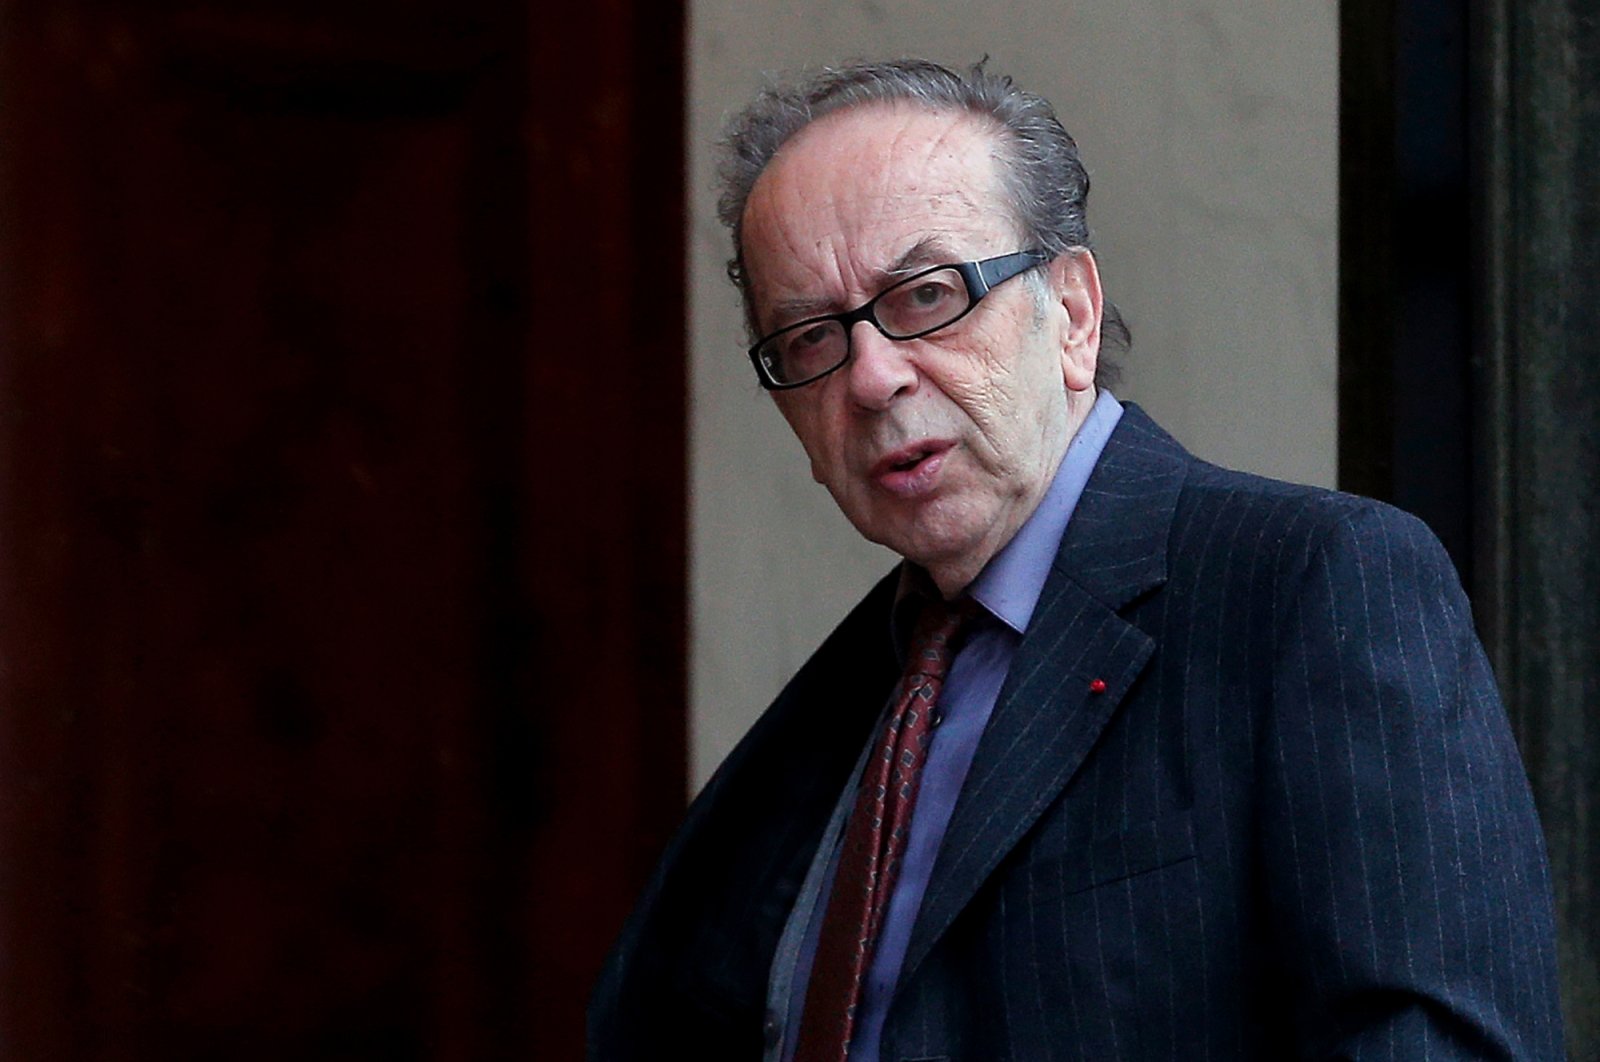 Albania&#039;s essayist and poet, Ismail Kadare, arrives at the Elysee Palace to receive the France&#039;s Legion d&#039;Honneur medal by French President Francois Hollande, Paris, France, May 30, 2016. (AP Photo)